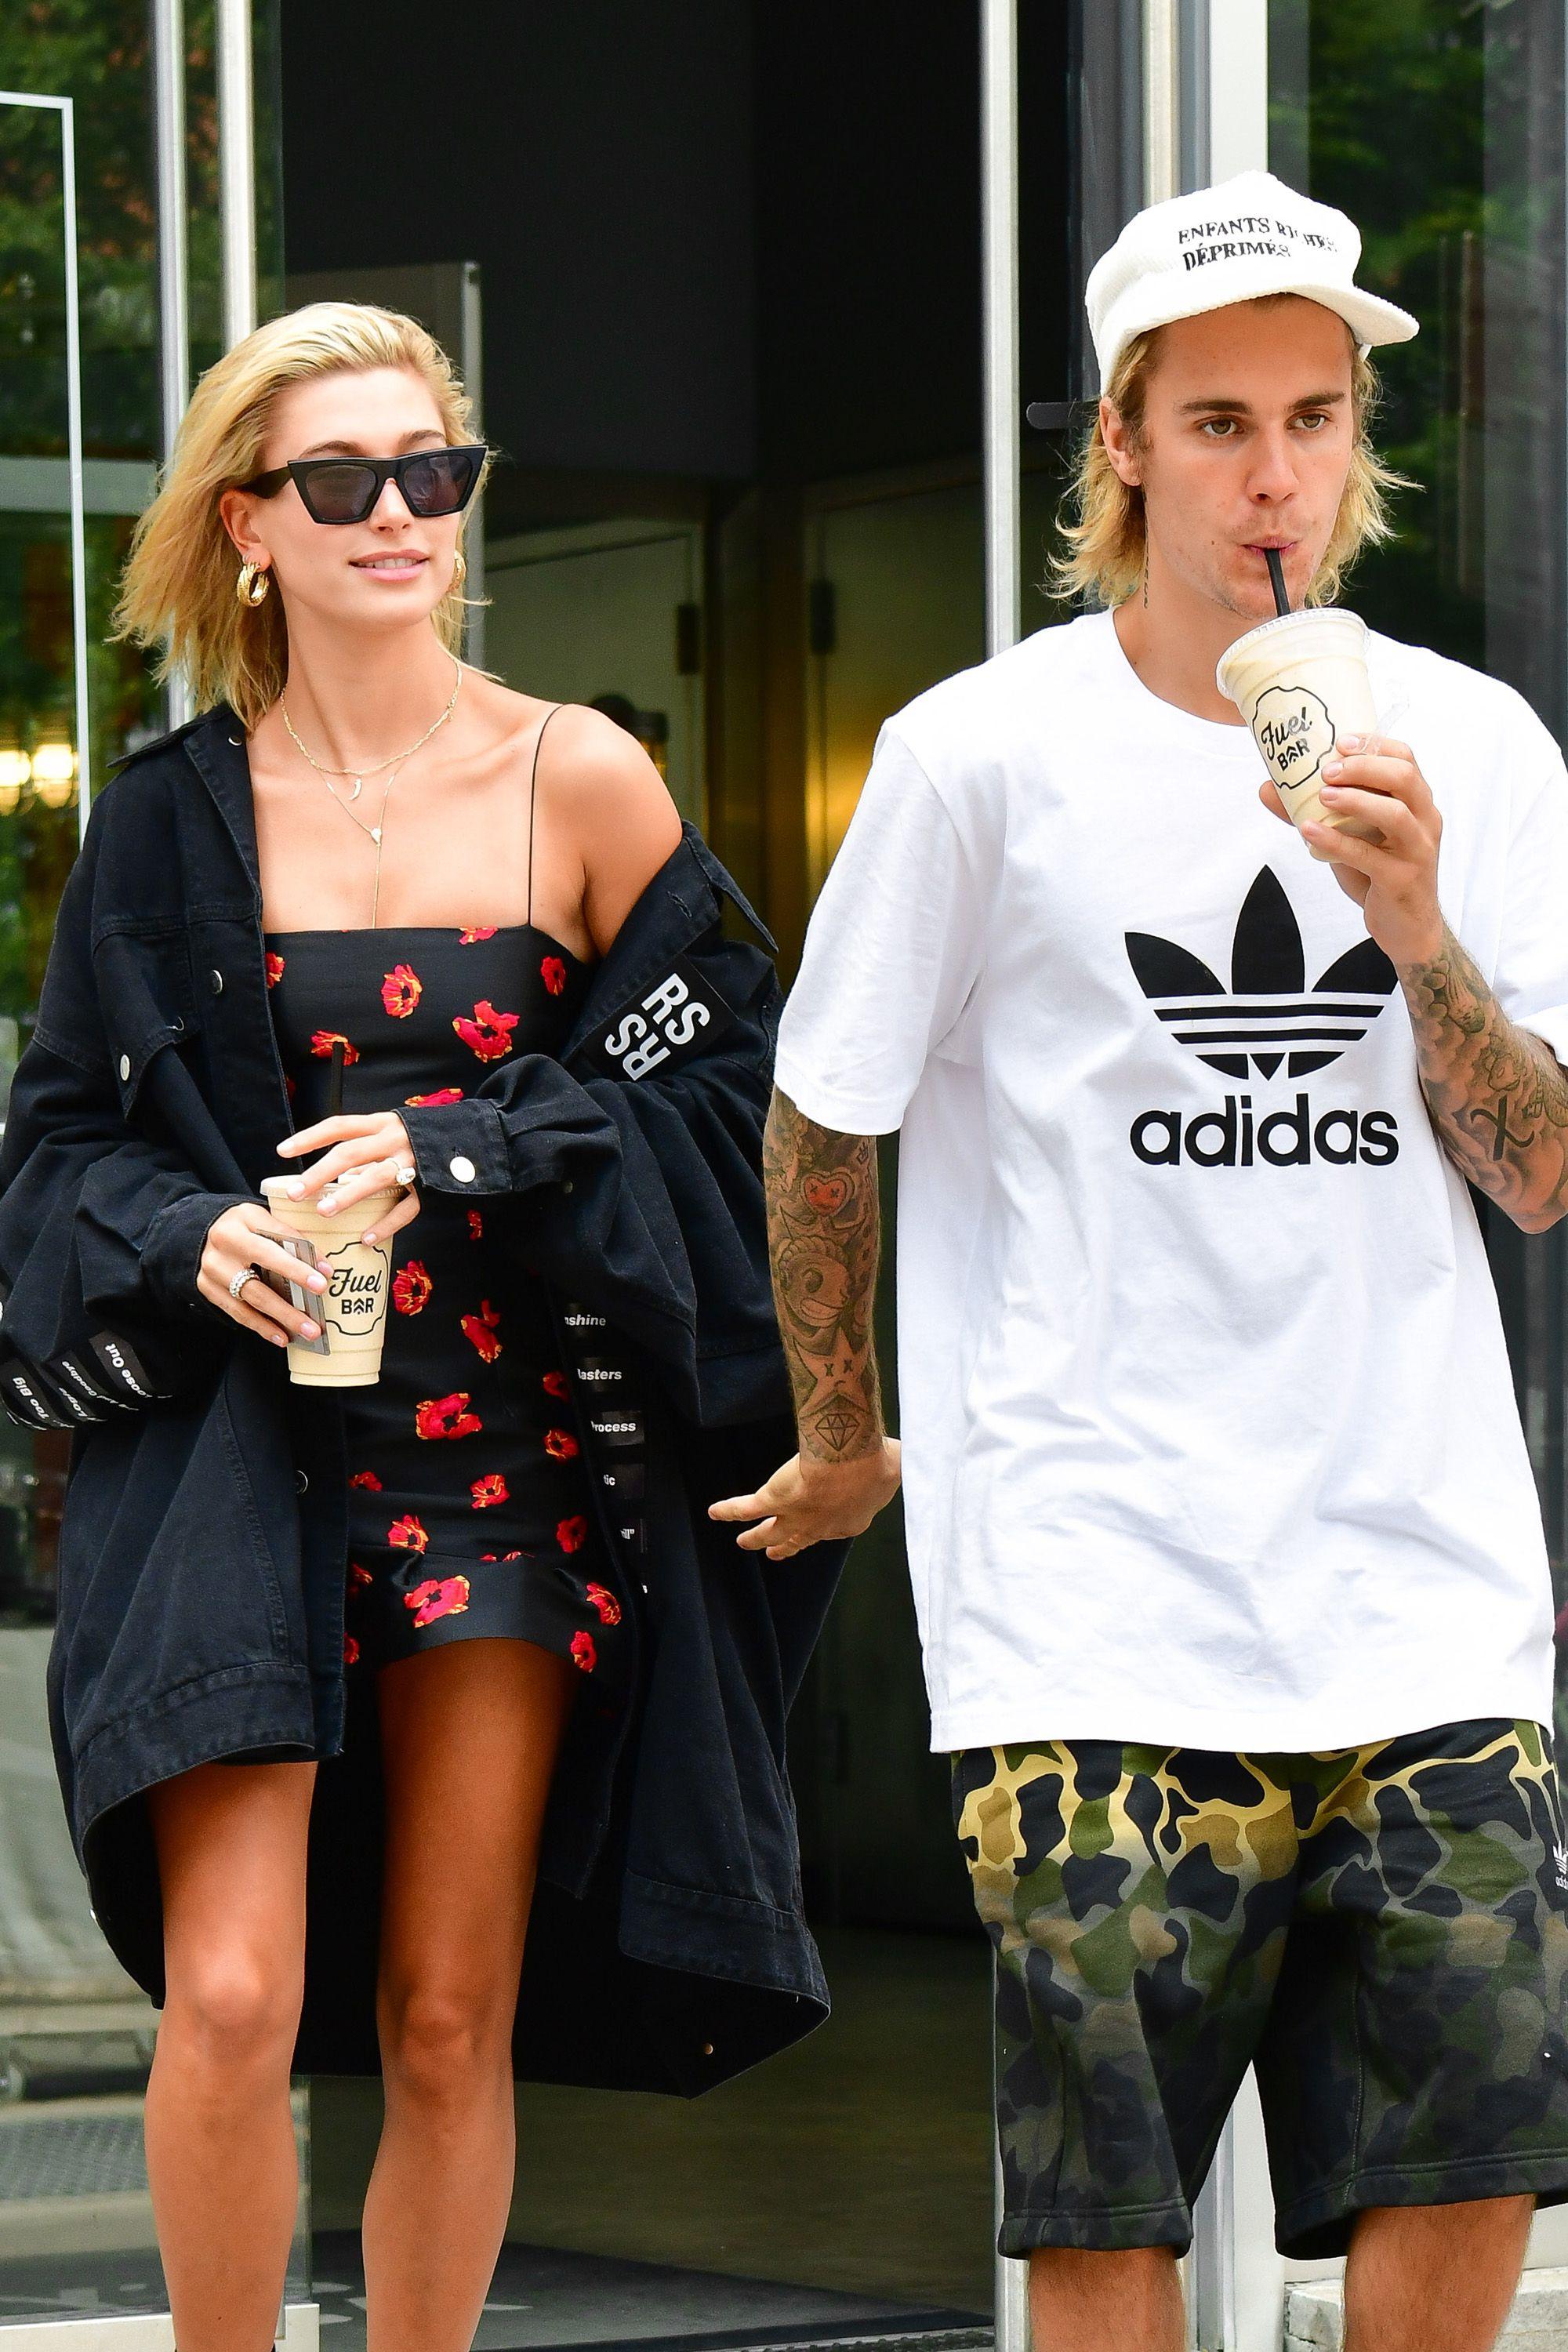 Hailey Baldwin and Justin Bieber's Relationship in Photo